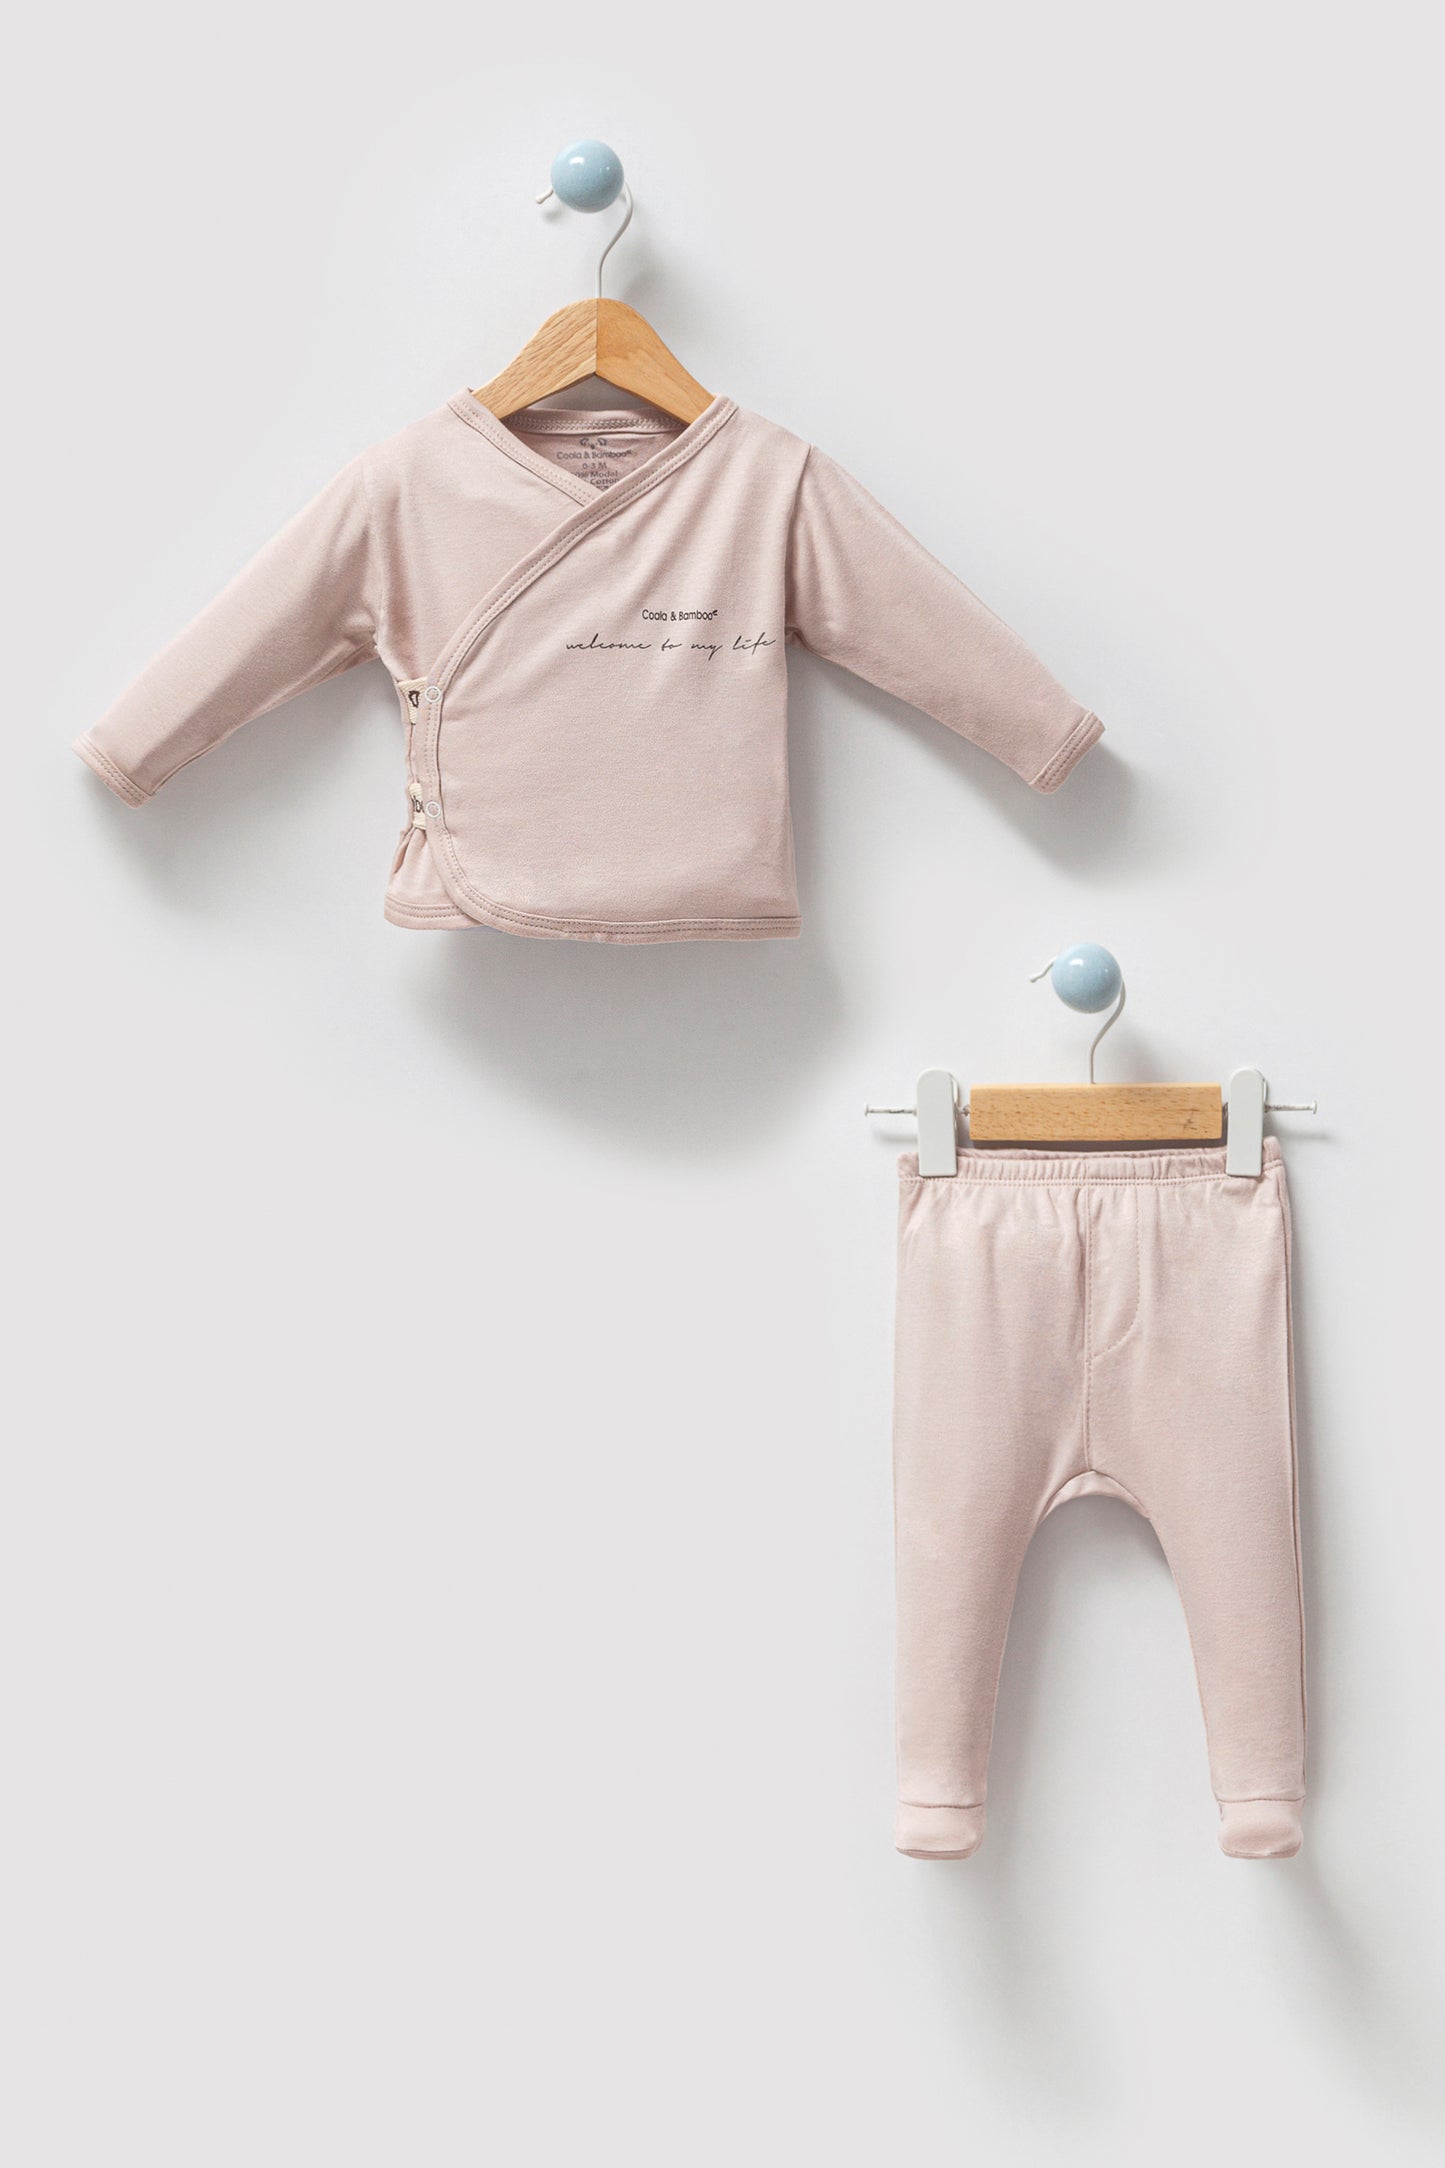 Baby Bodysuit Set Aged 0-3 Months- colored Stone